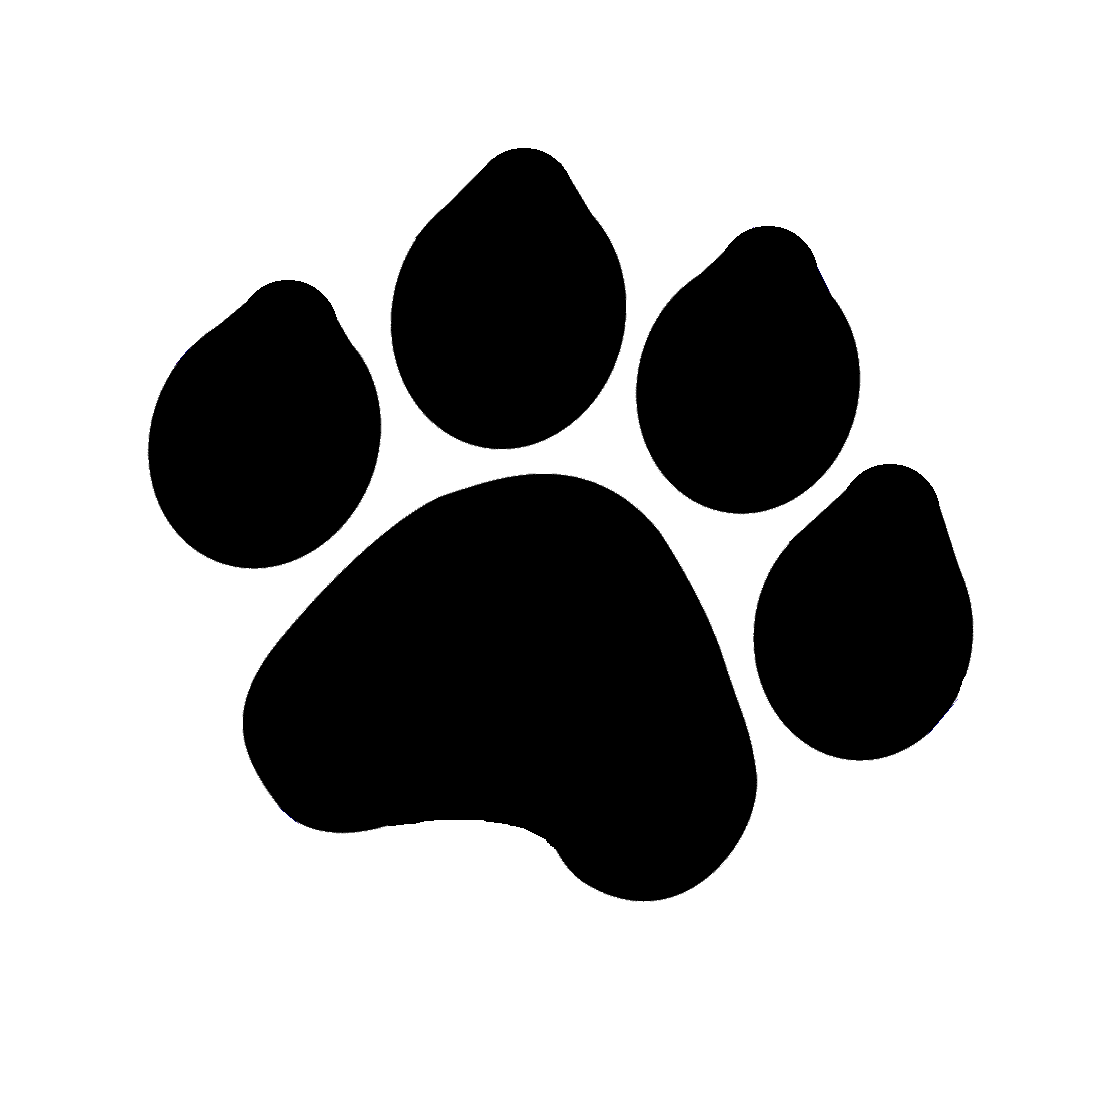 Dog Paw Border Clipart Clipart Panda Free Clipart Images